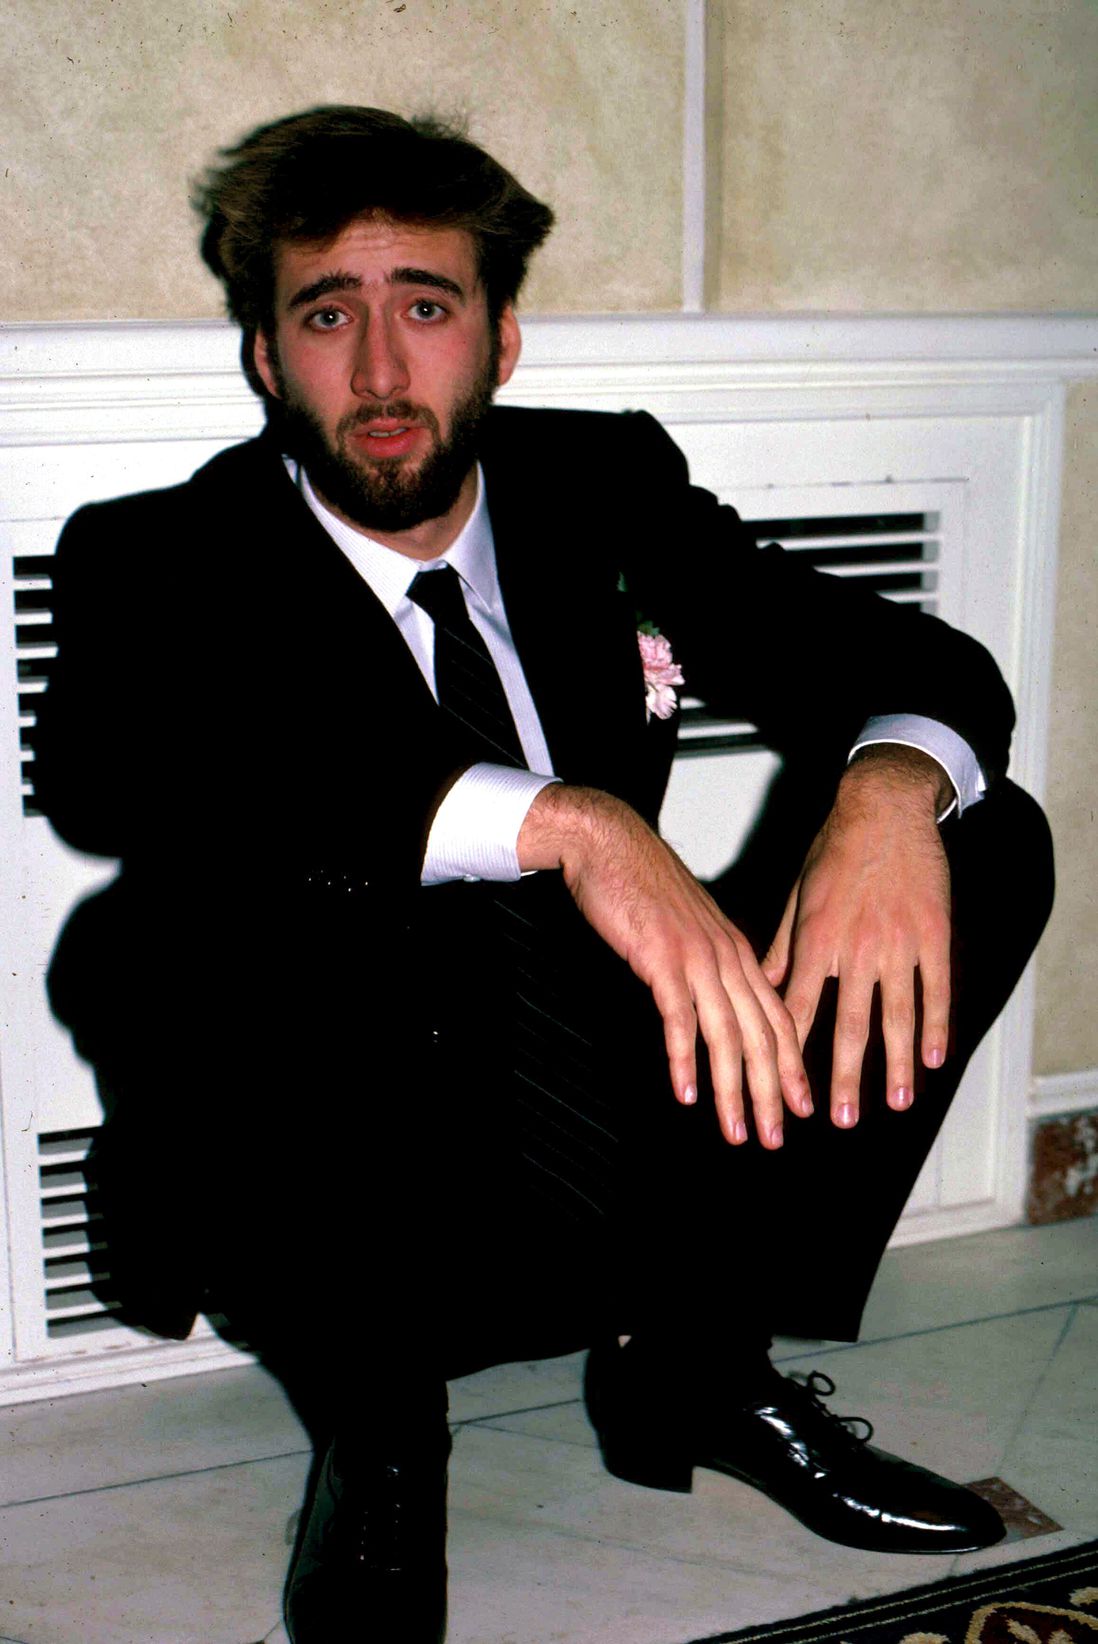 Nic Cage at Gracie Mansion, 1980s.